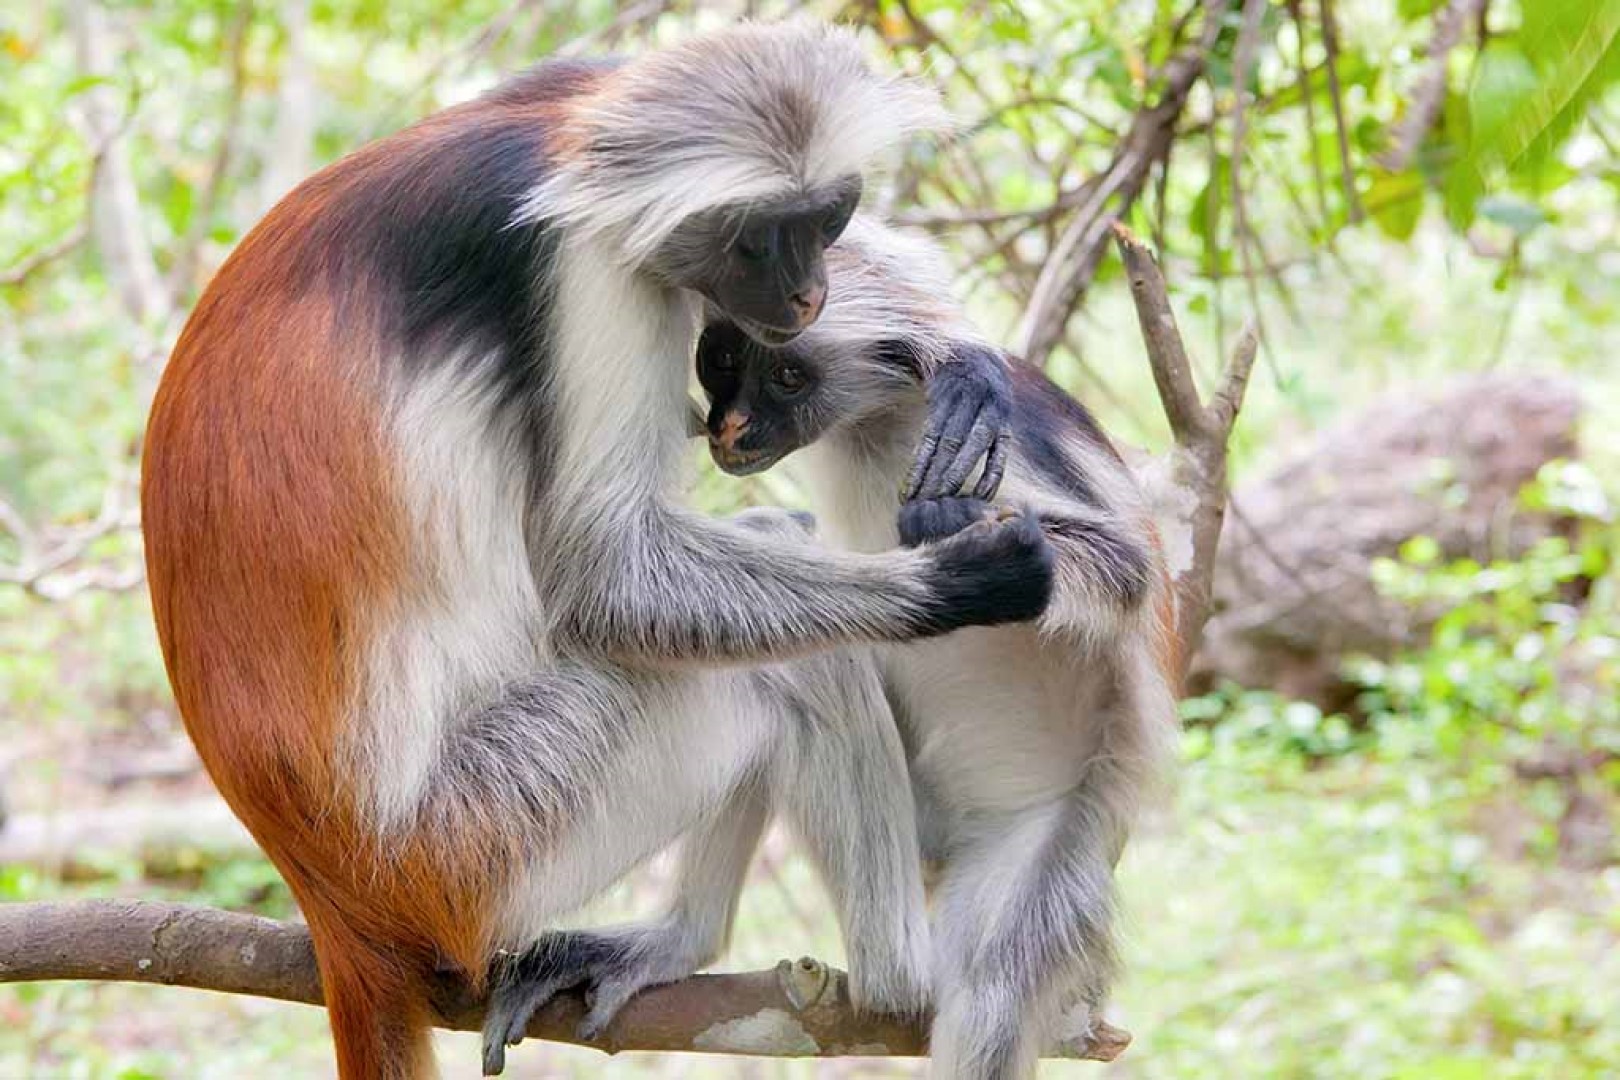 A female red colobus monkey embracing its young one